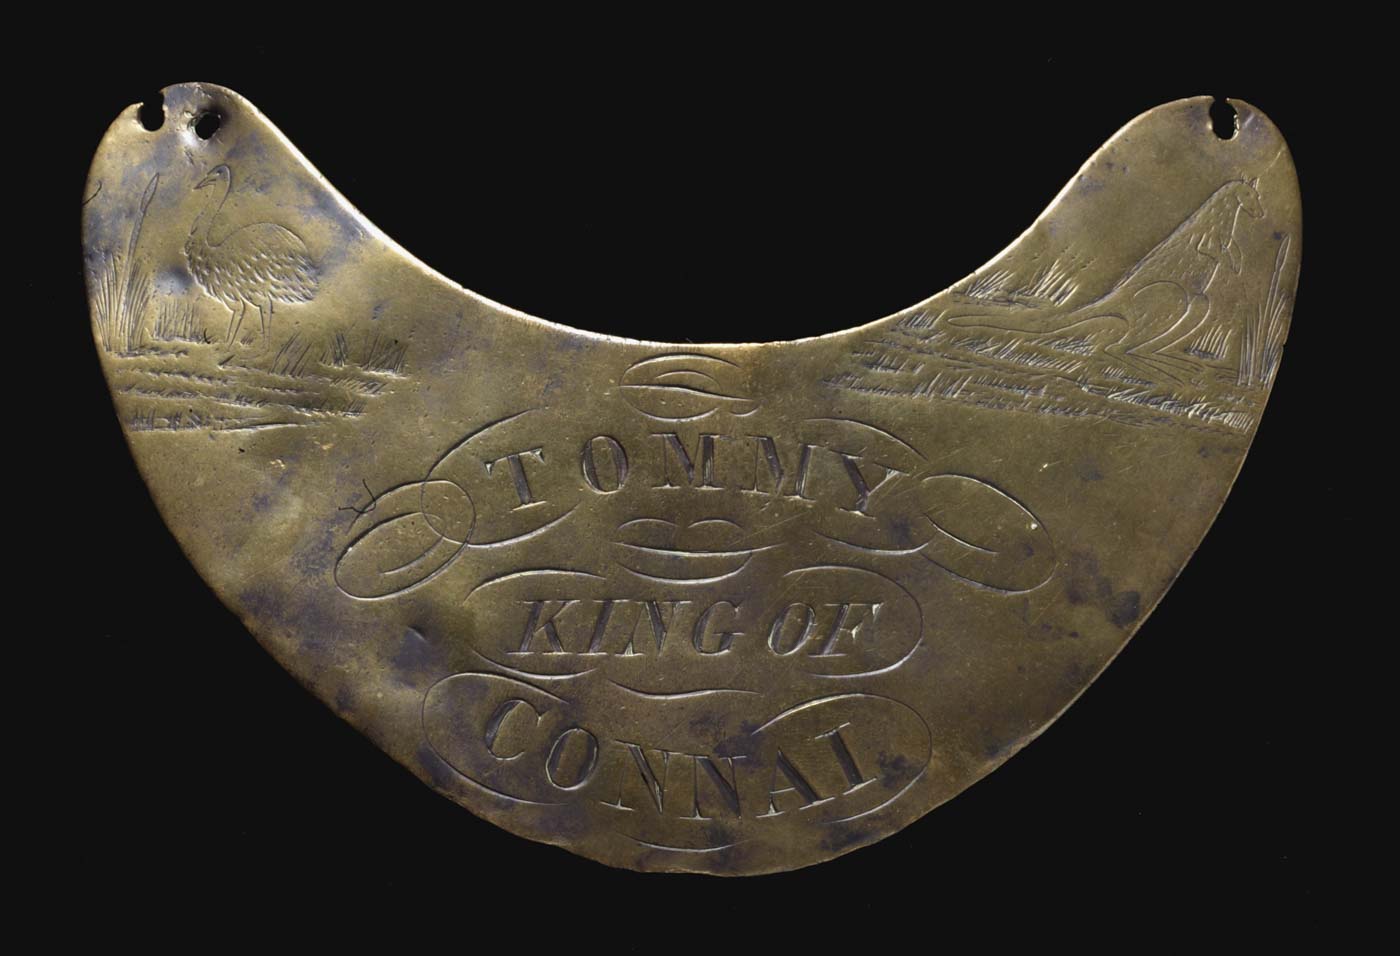 Engraved breastplate. - click to view larger image